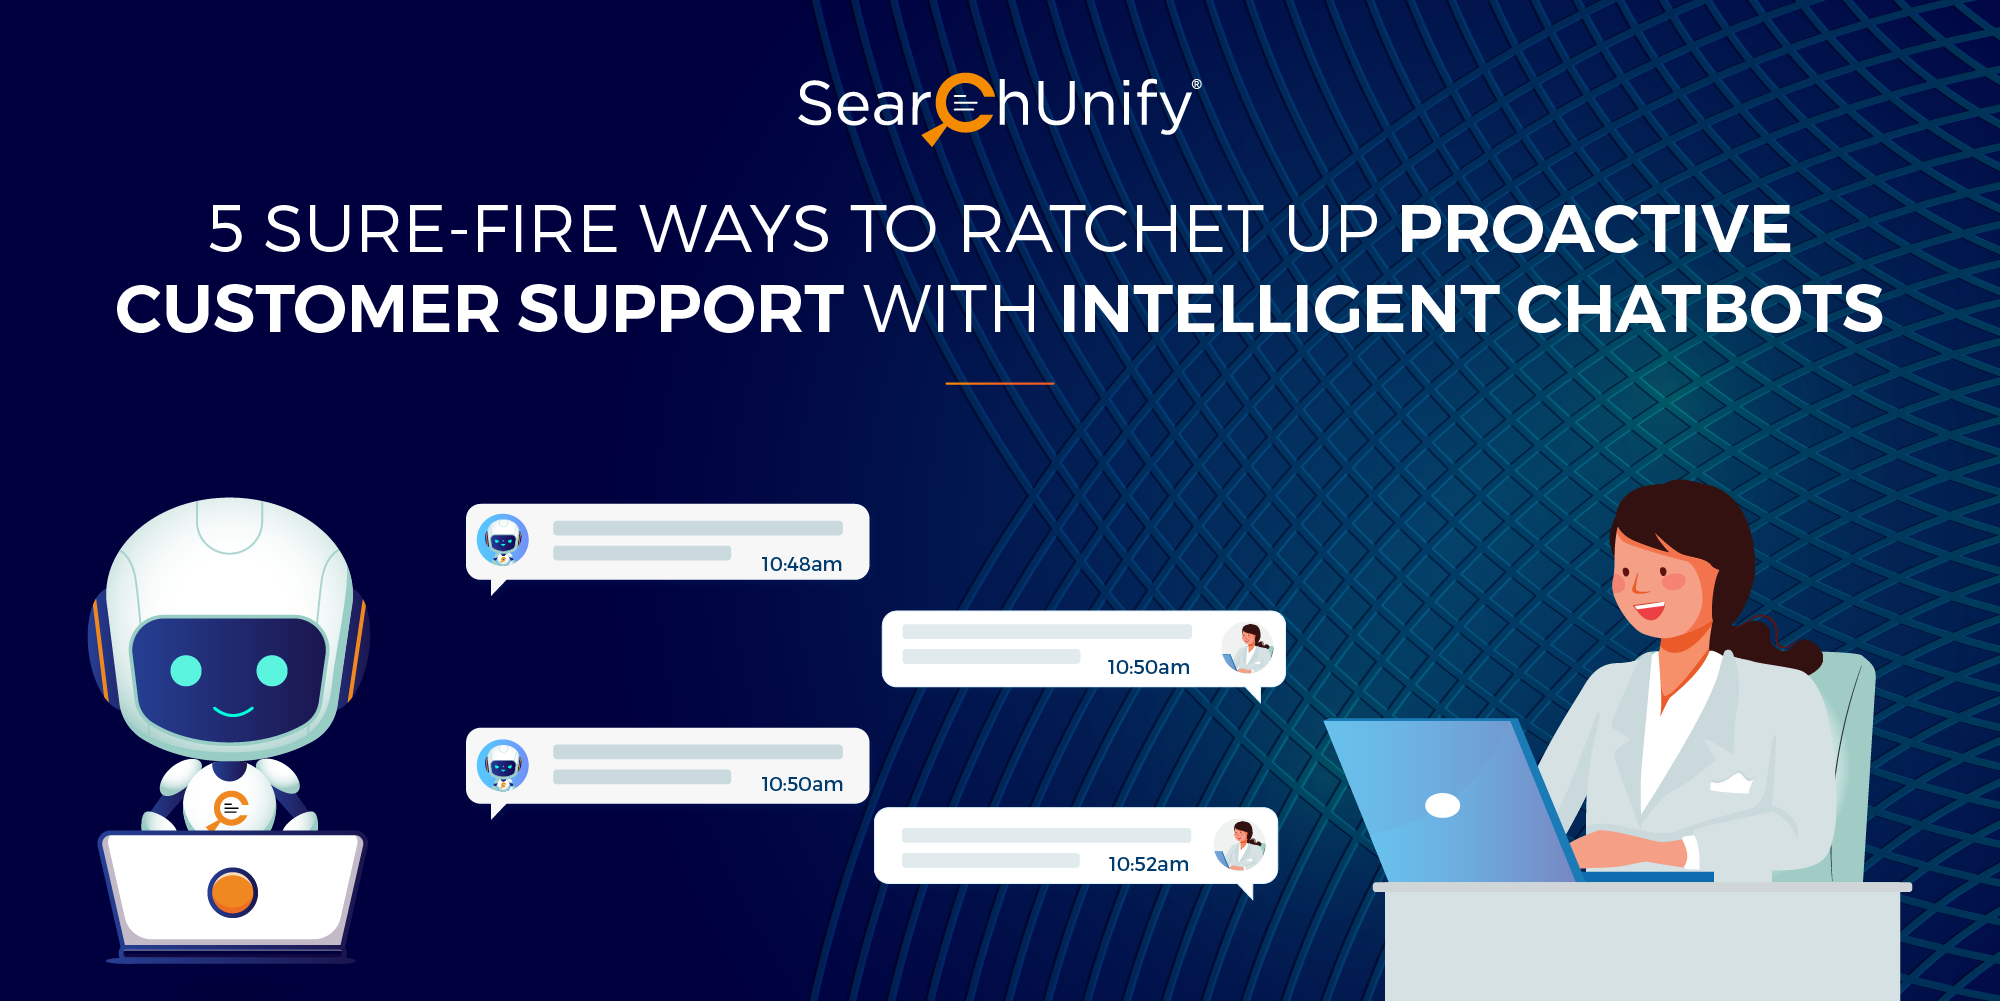 5 Sure-Fire Ways to Ratchet up Proactive Customer Support With Intelligent Chatbots